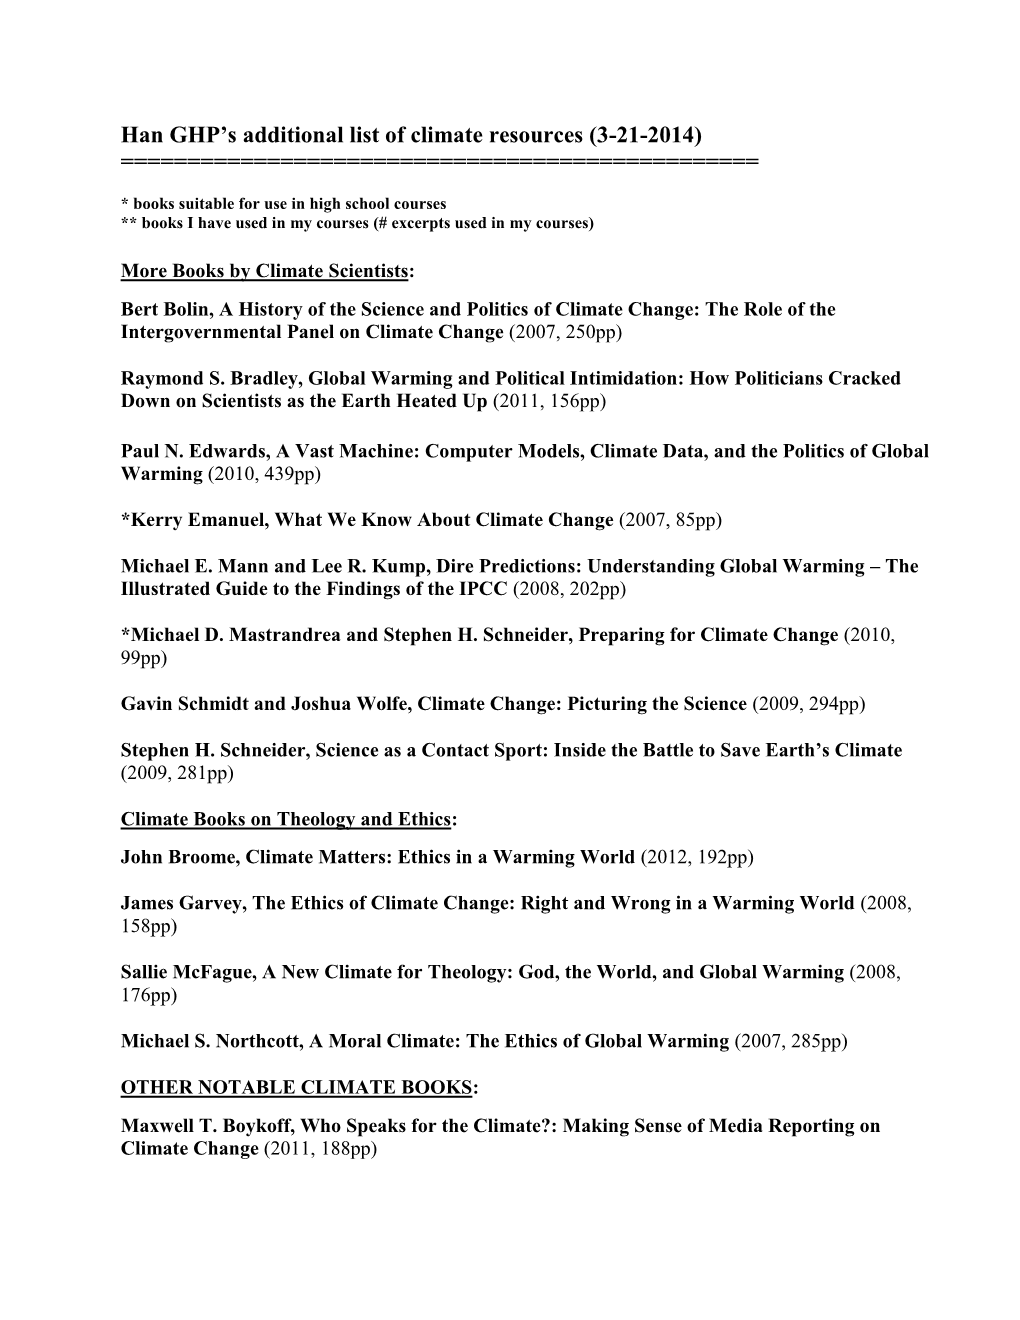 Han GHP's Additional List of Climate Resources (3-21-2014